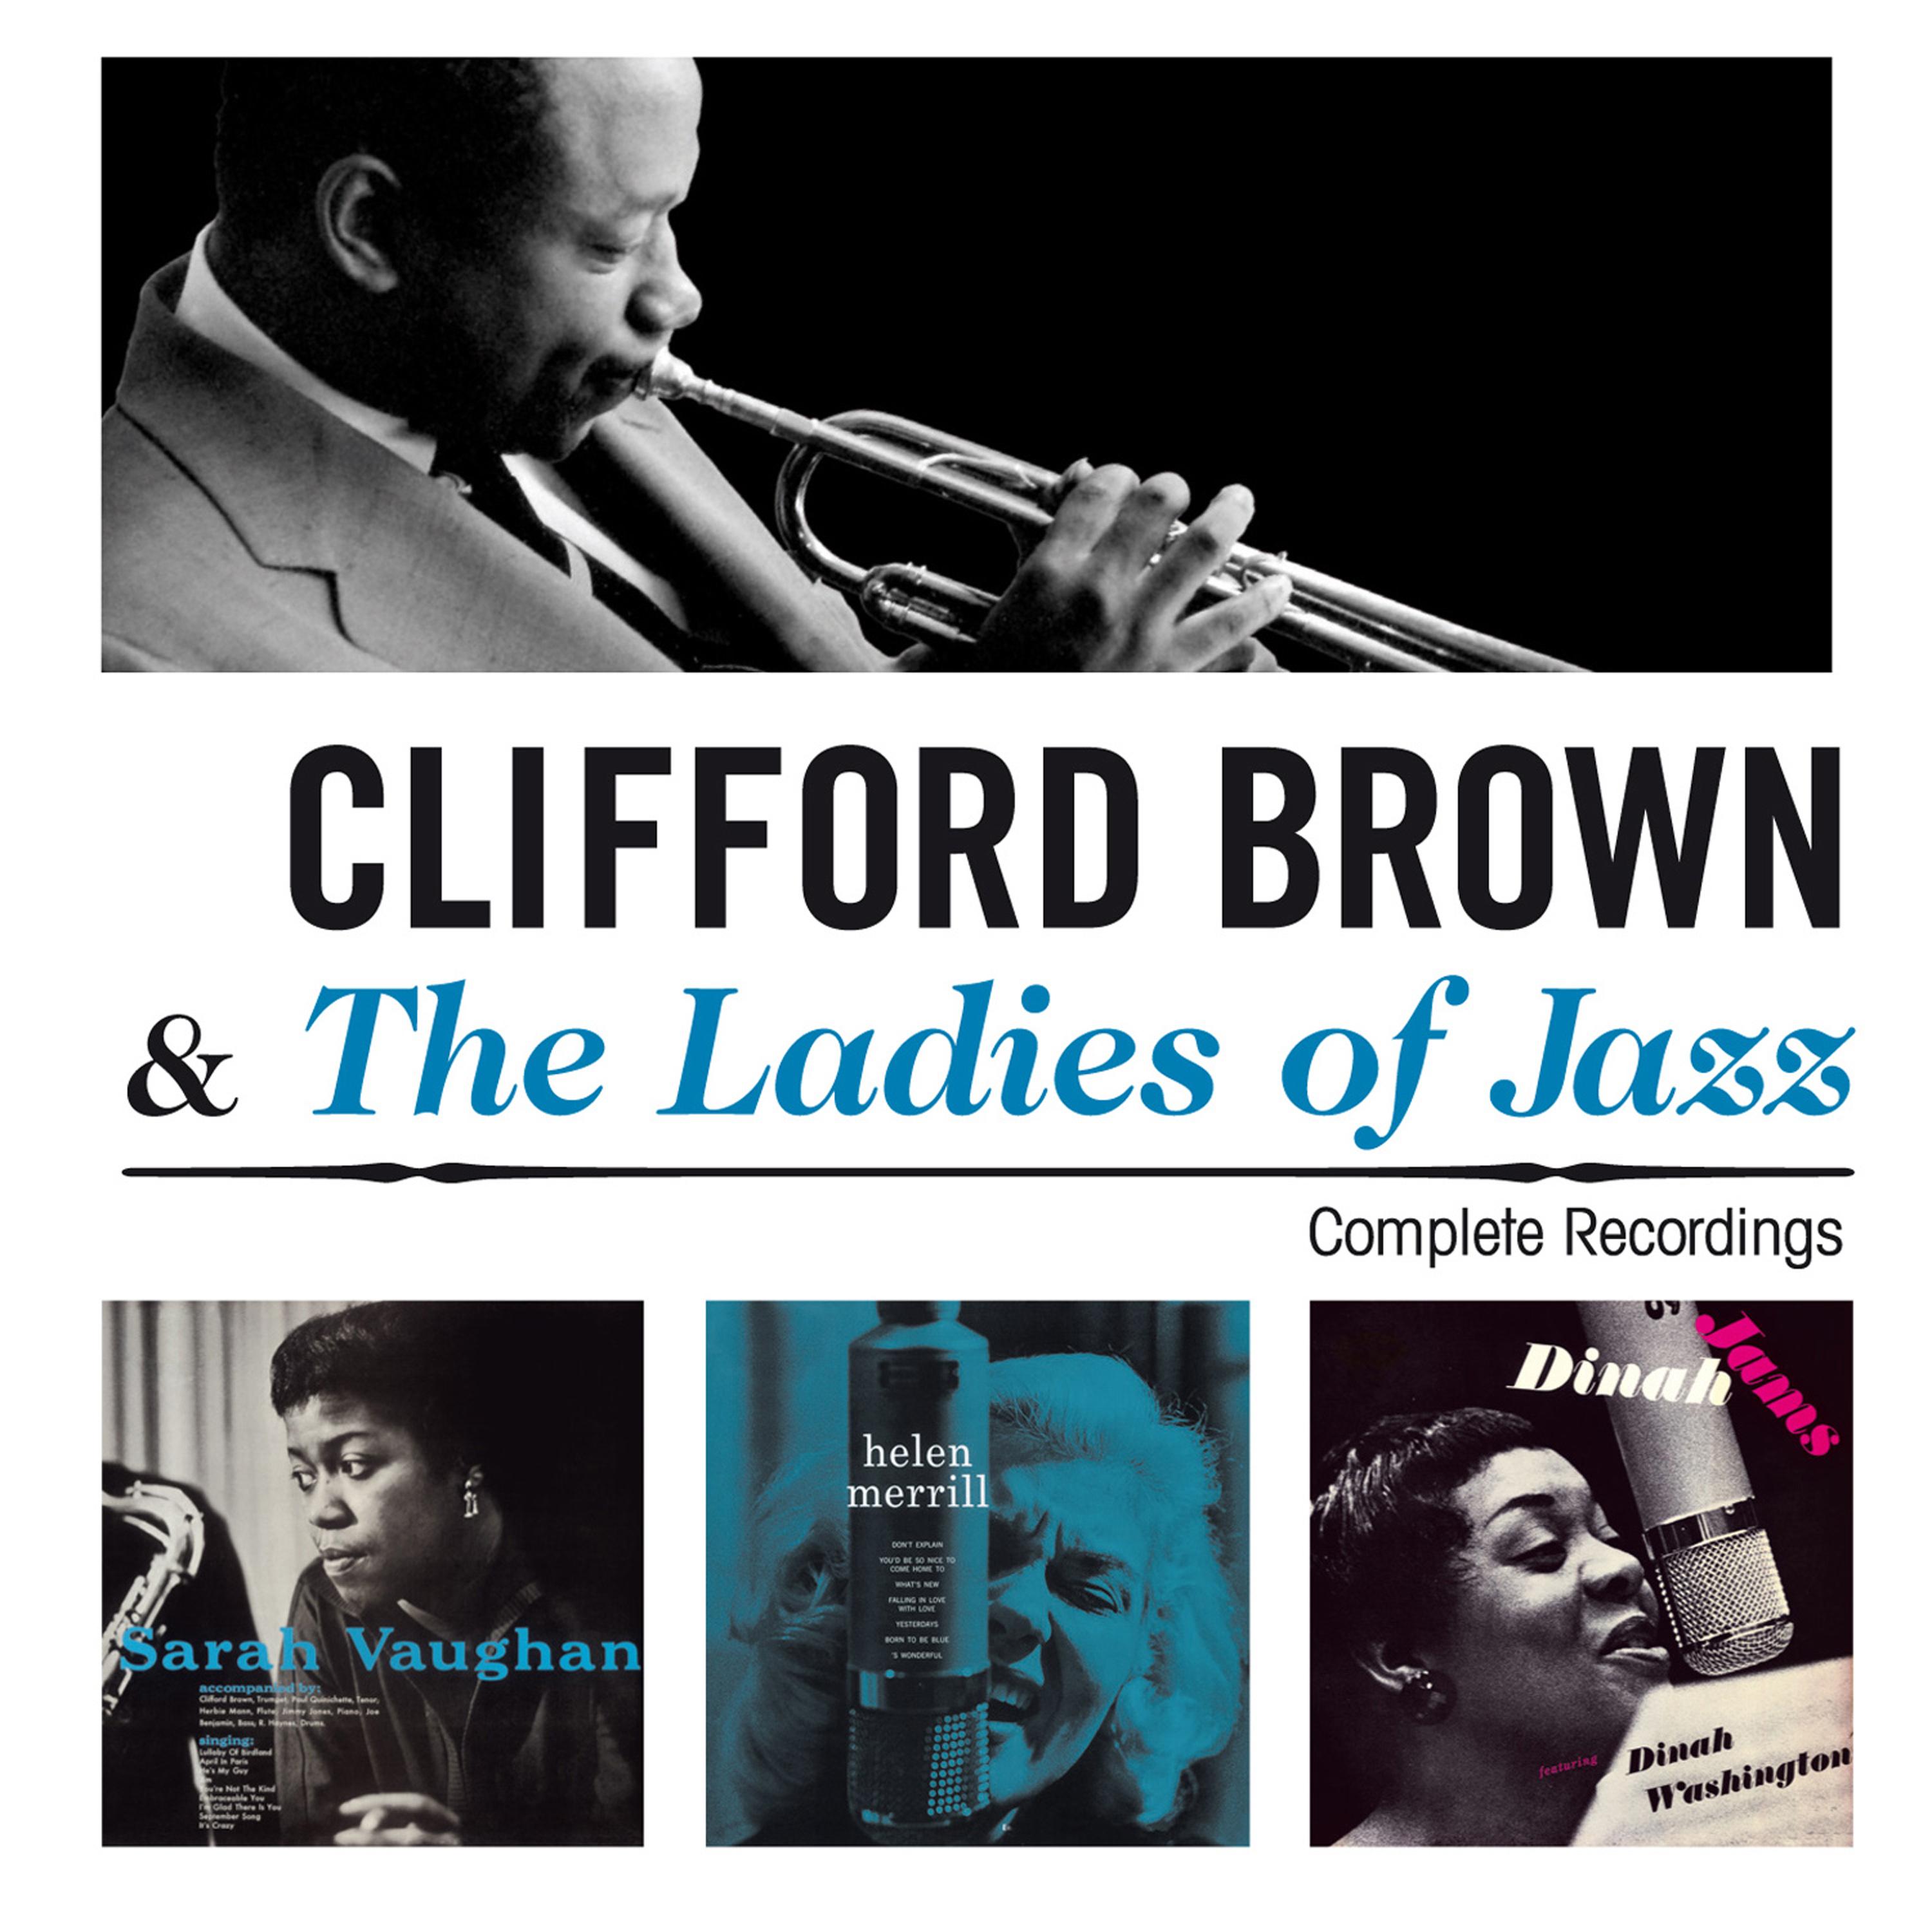 Clifford Brown & The Ladies of Jazz. Complete Recordings